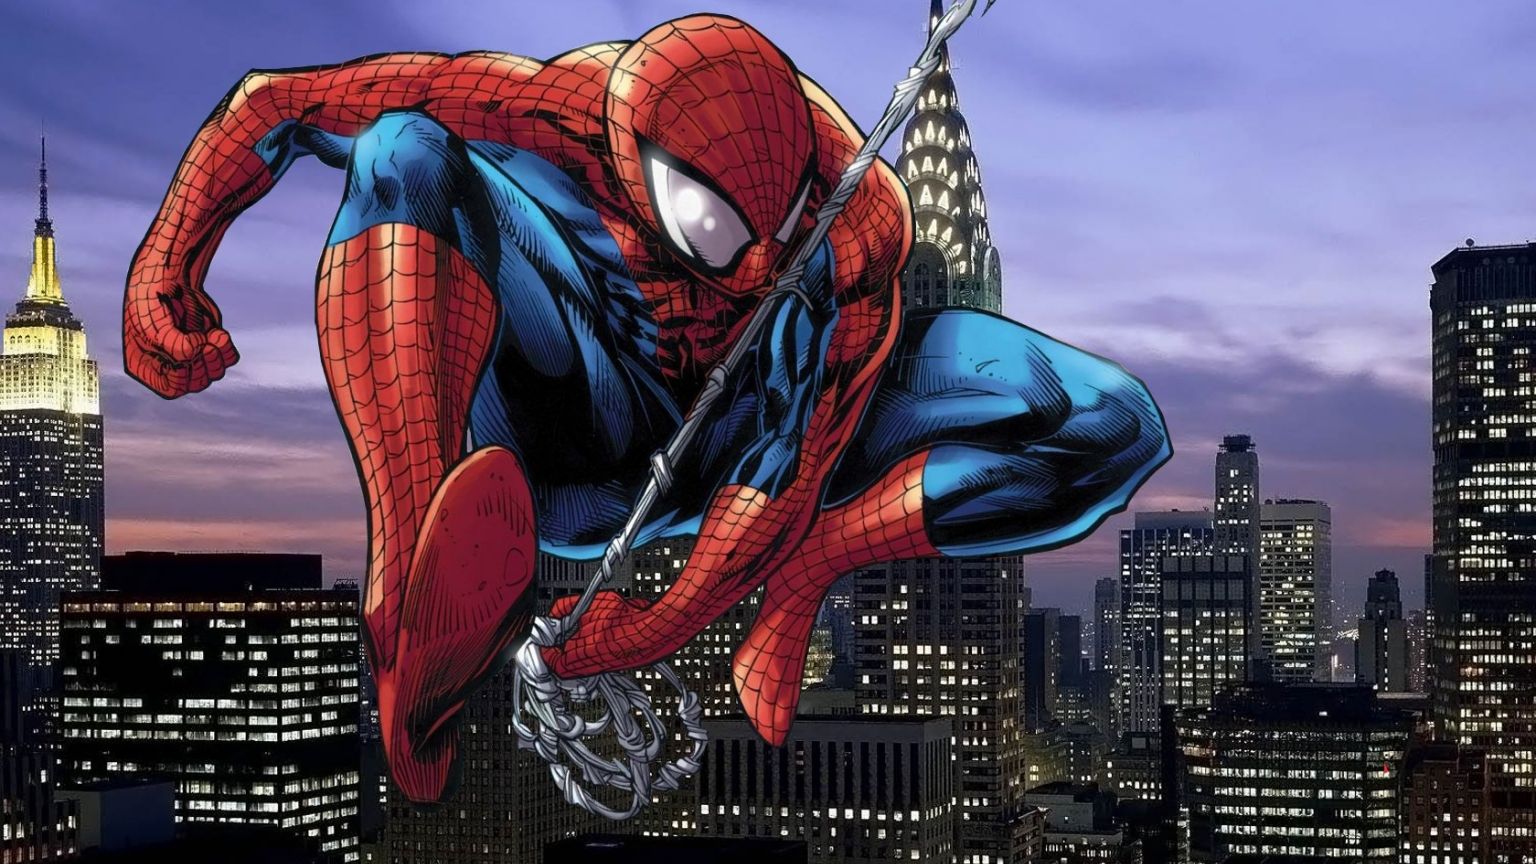 Free download Spider man Marvel Wallpapers 1680x1050 Spiderman.